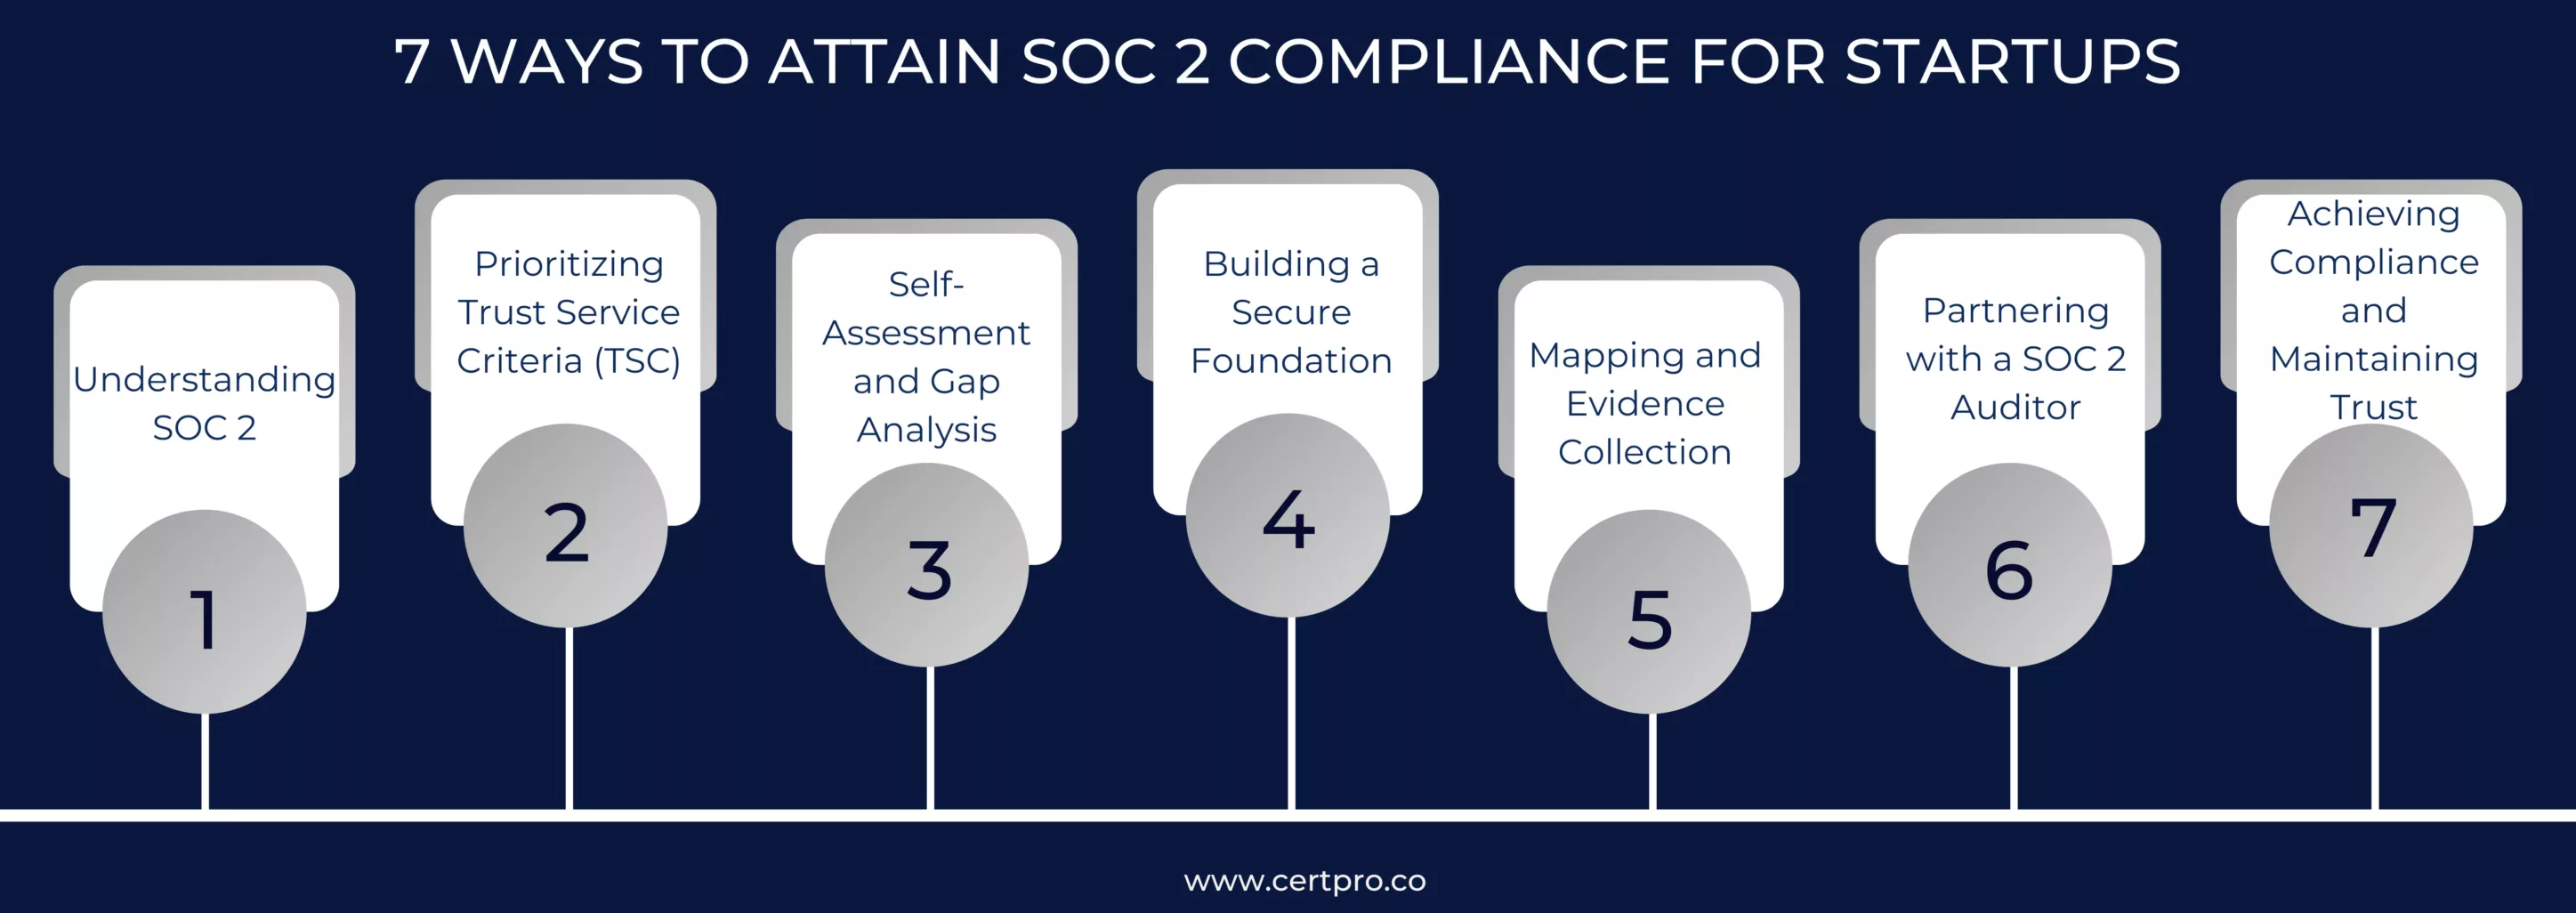 7 WAYS TO ATTAIN SOC 2 COMPLIANCE FOR STARTUPS